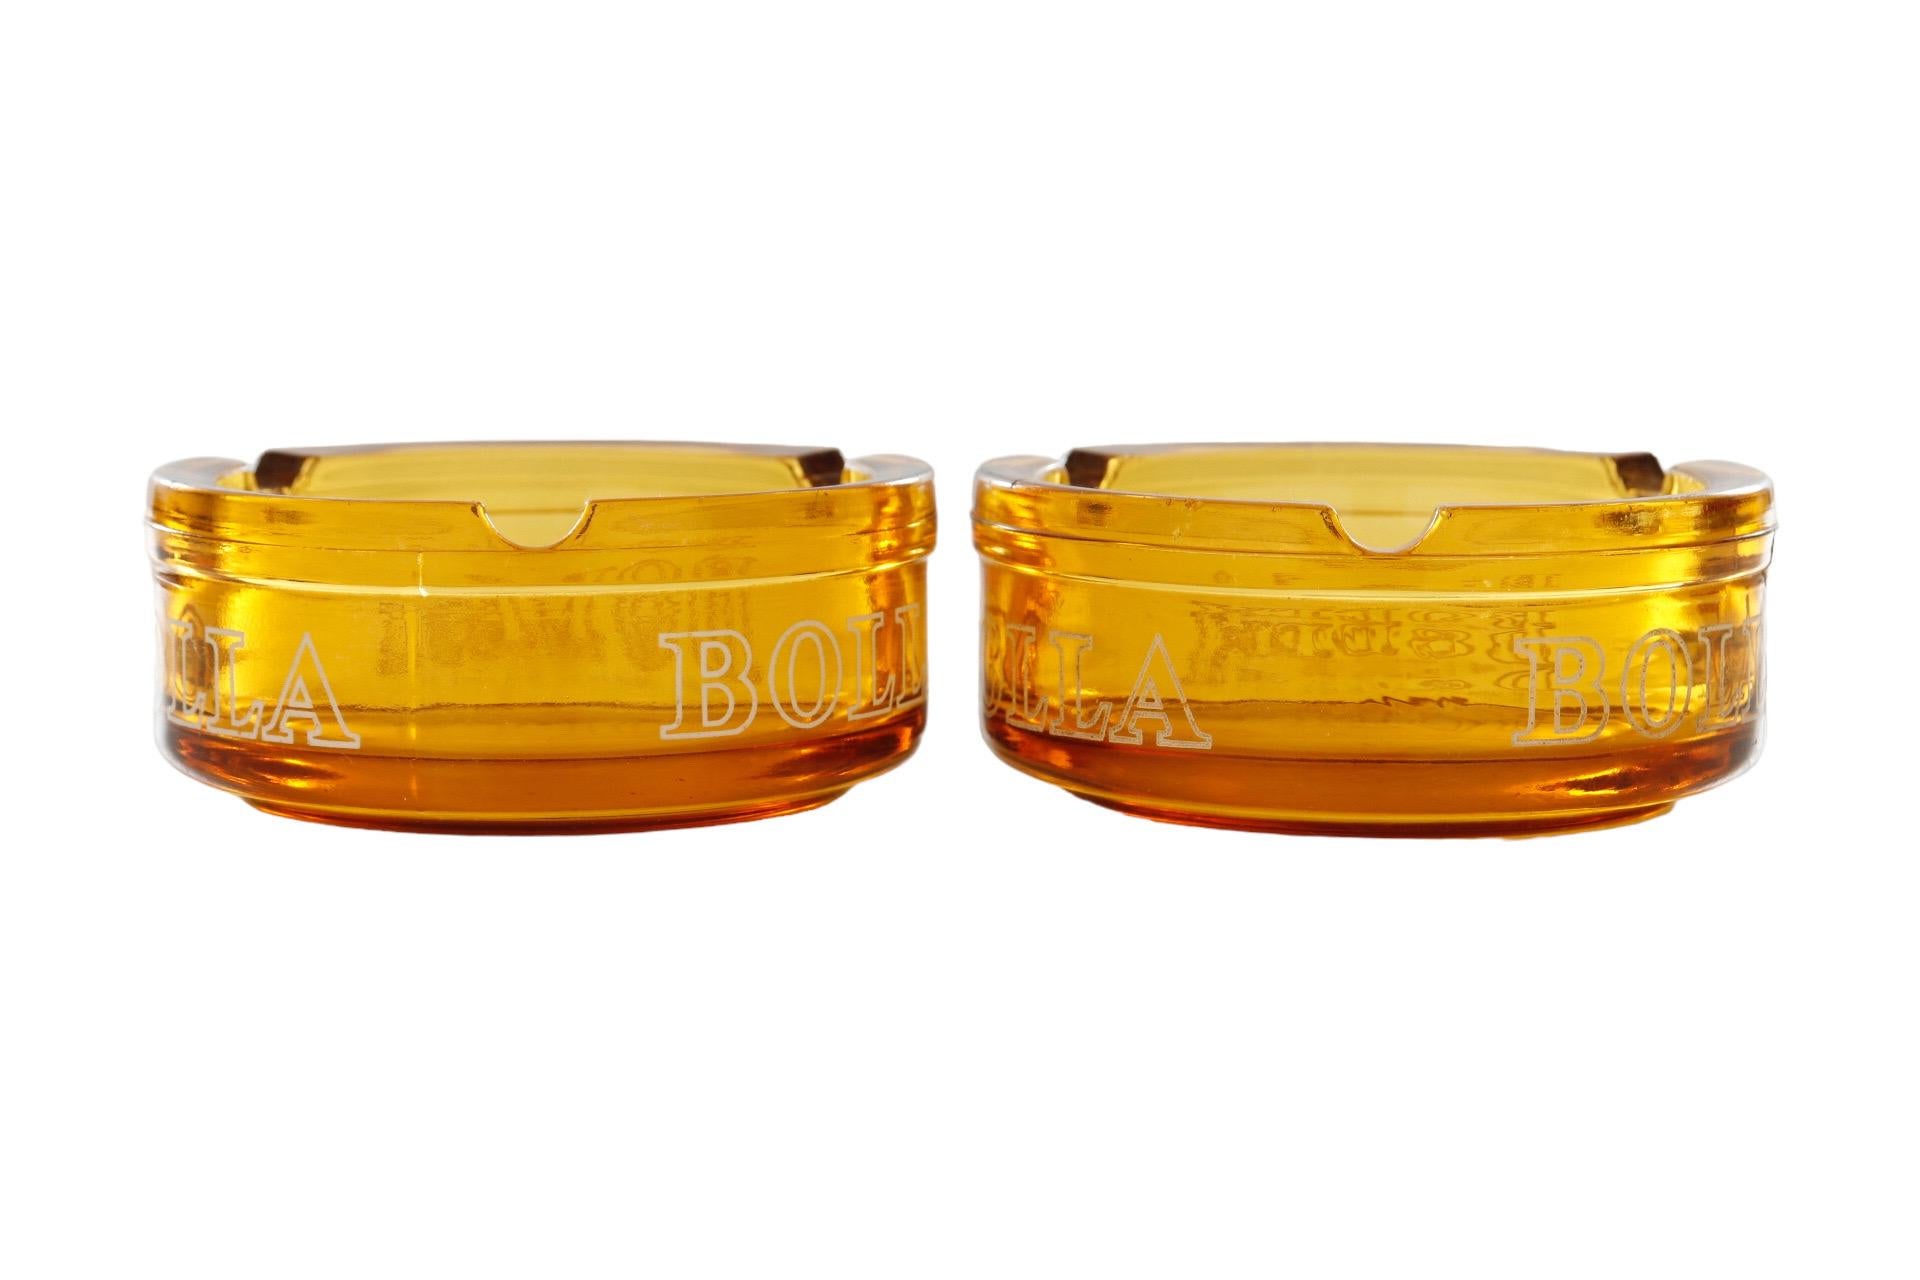 A pair of Bolla wine amber glass ashtrays. Each ashtray has three cigarette rests and 'Bolla' in bold white lettering repeated three times around the edge. Dimensions per ashtray.
